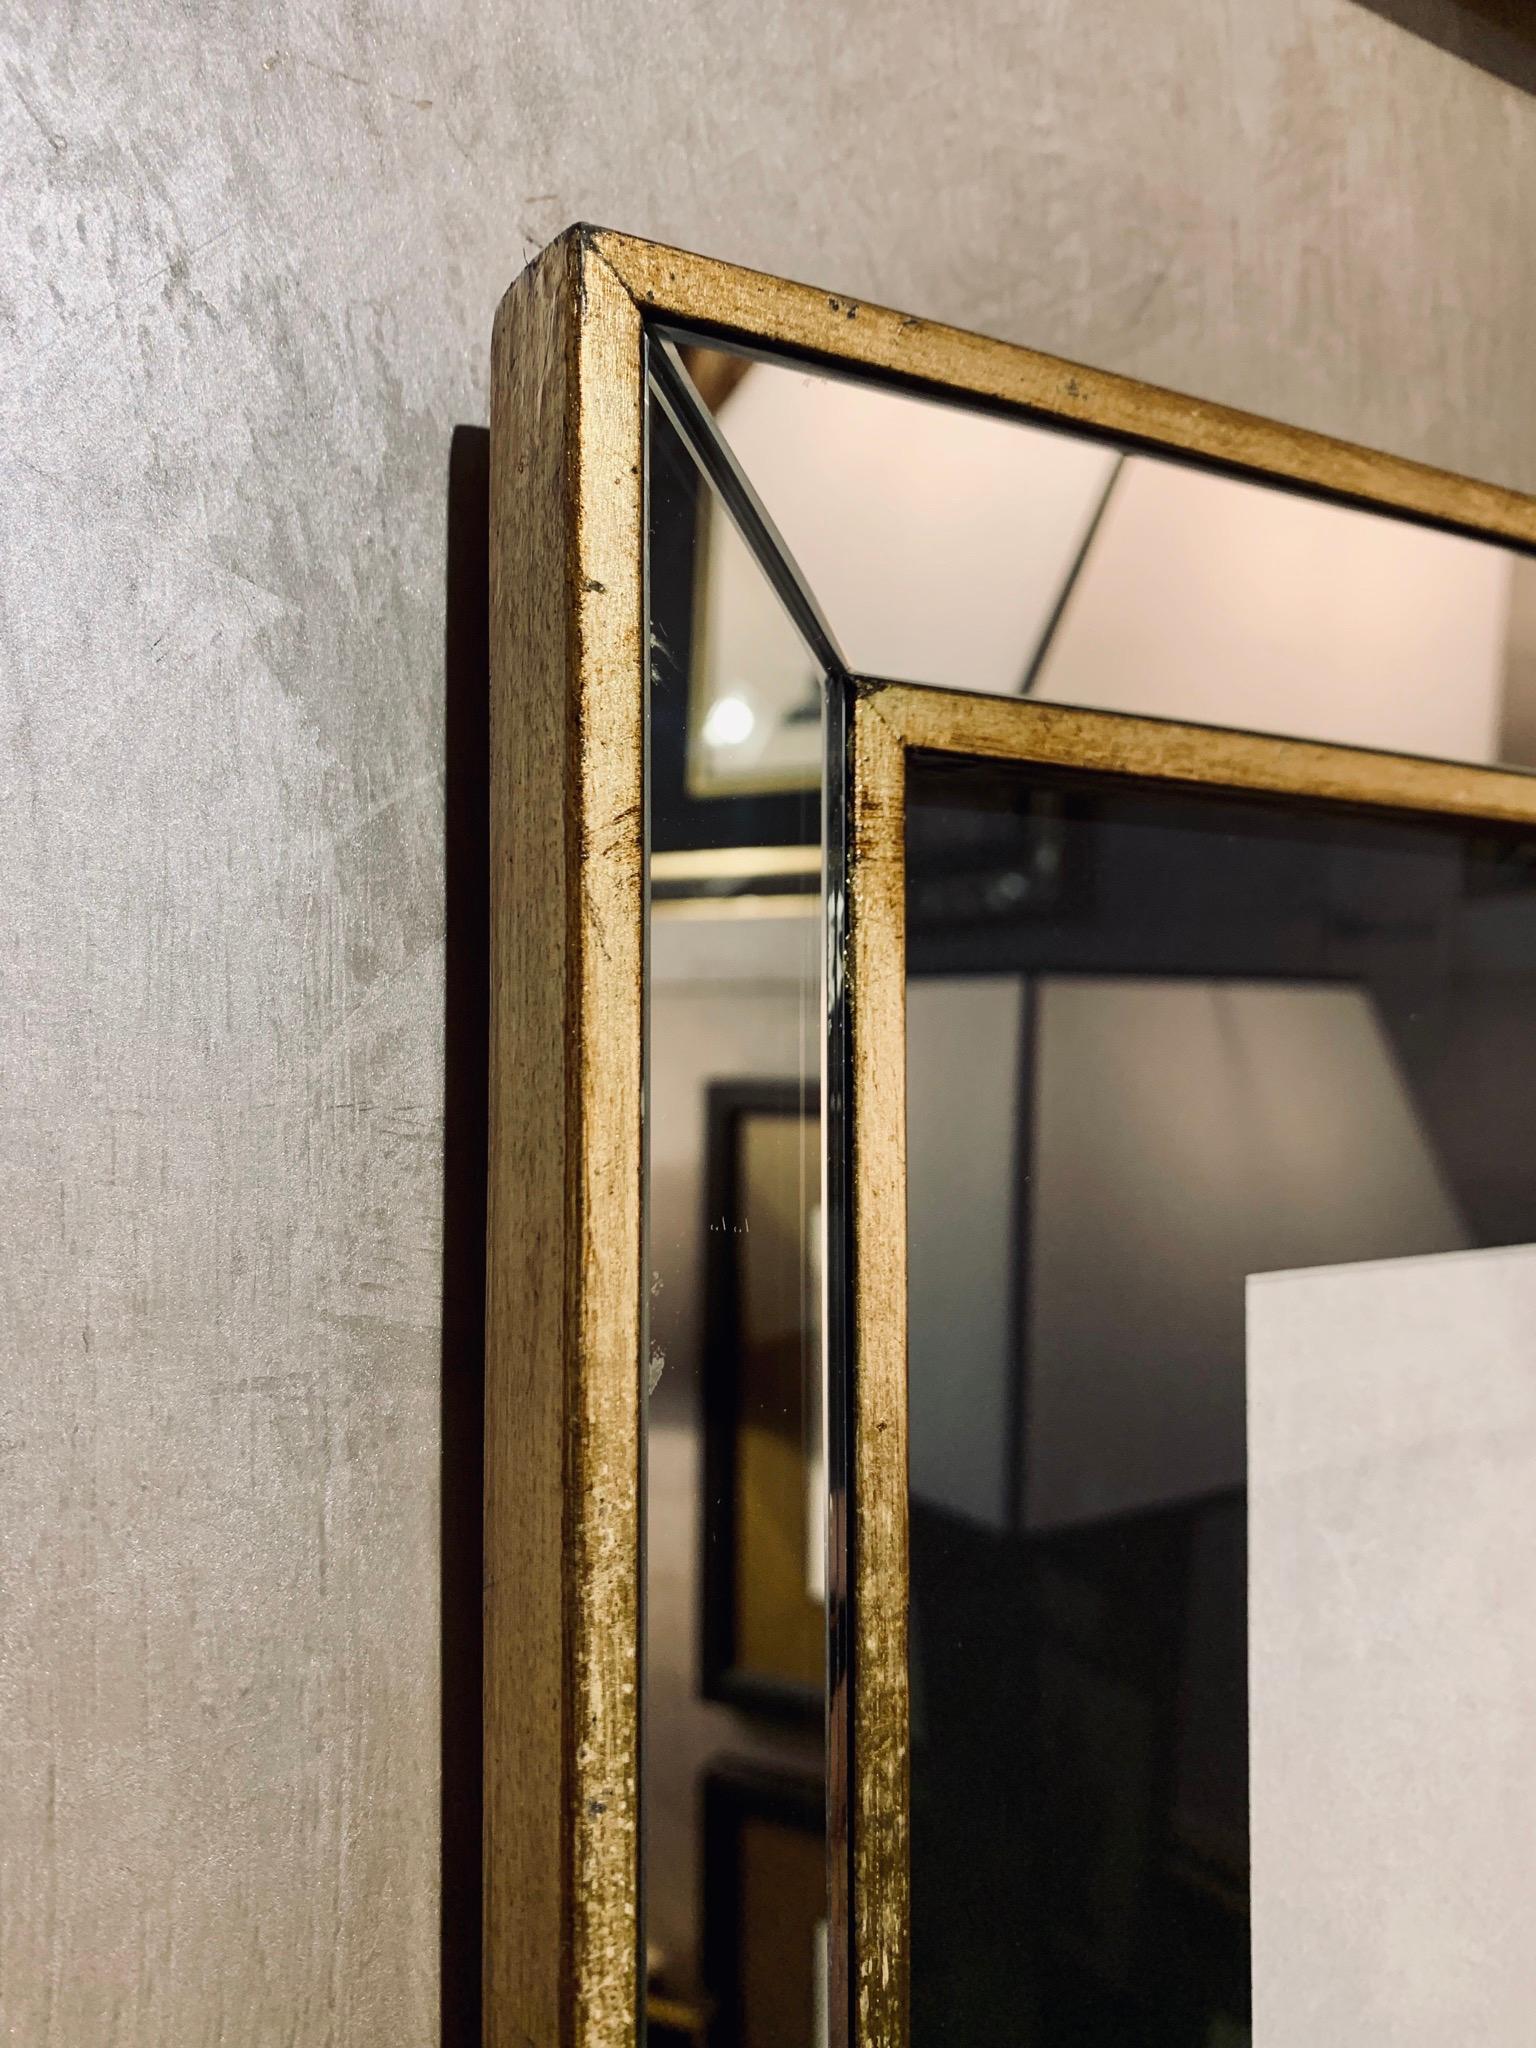 Hand-Painted Contemporary Italian Golden Leaf, Gilded Wood Frame with Mirror '4 of 4' For Sale